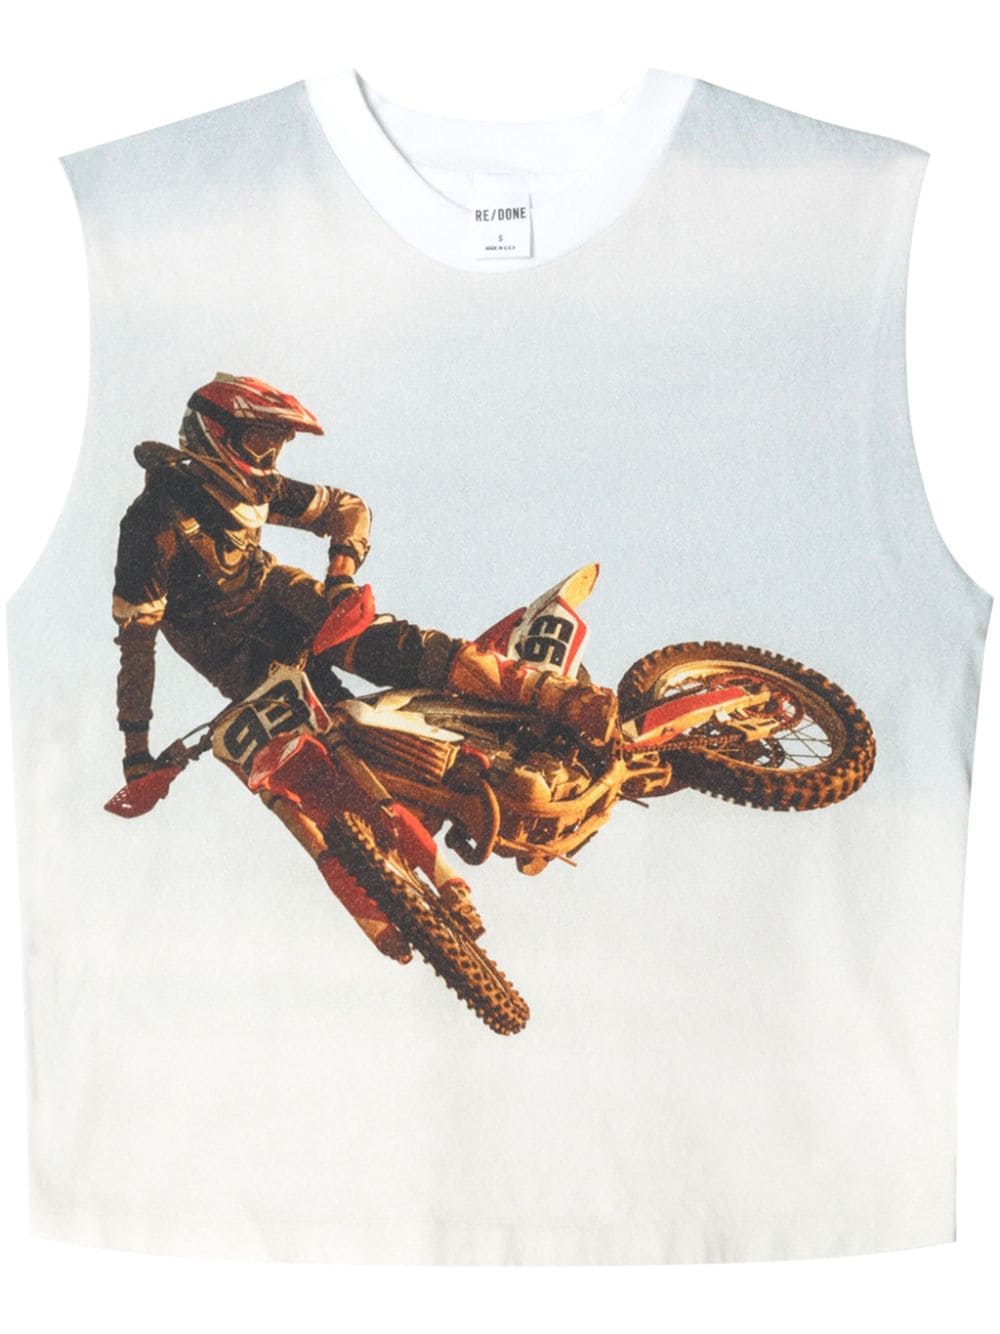 RE/DONE Baby Muscle Motocross-print top - White von RE/DONE